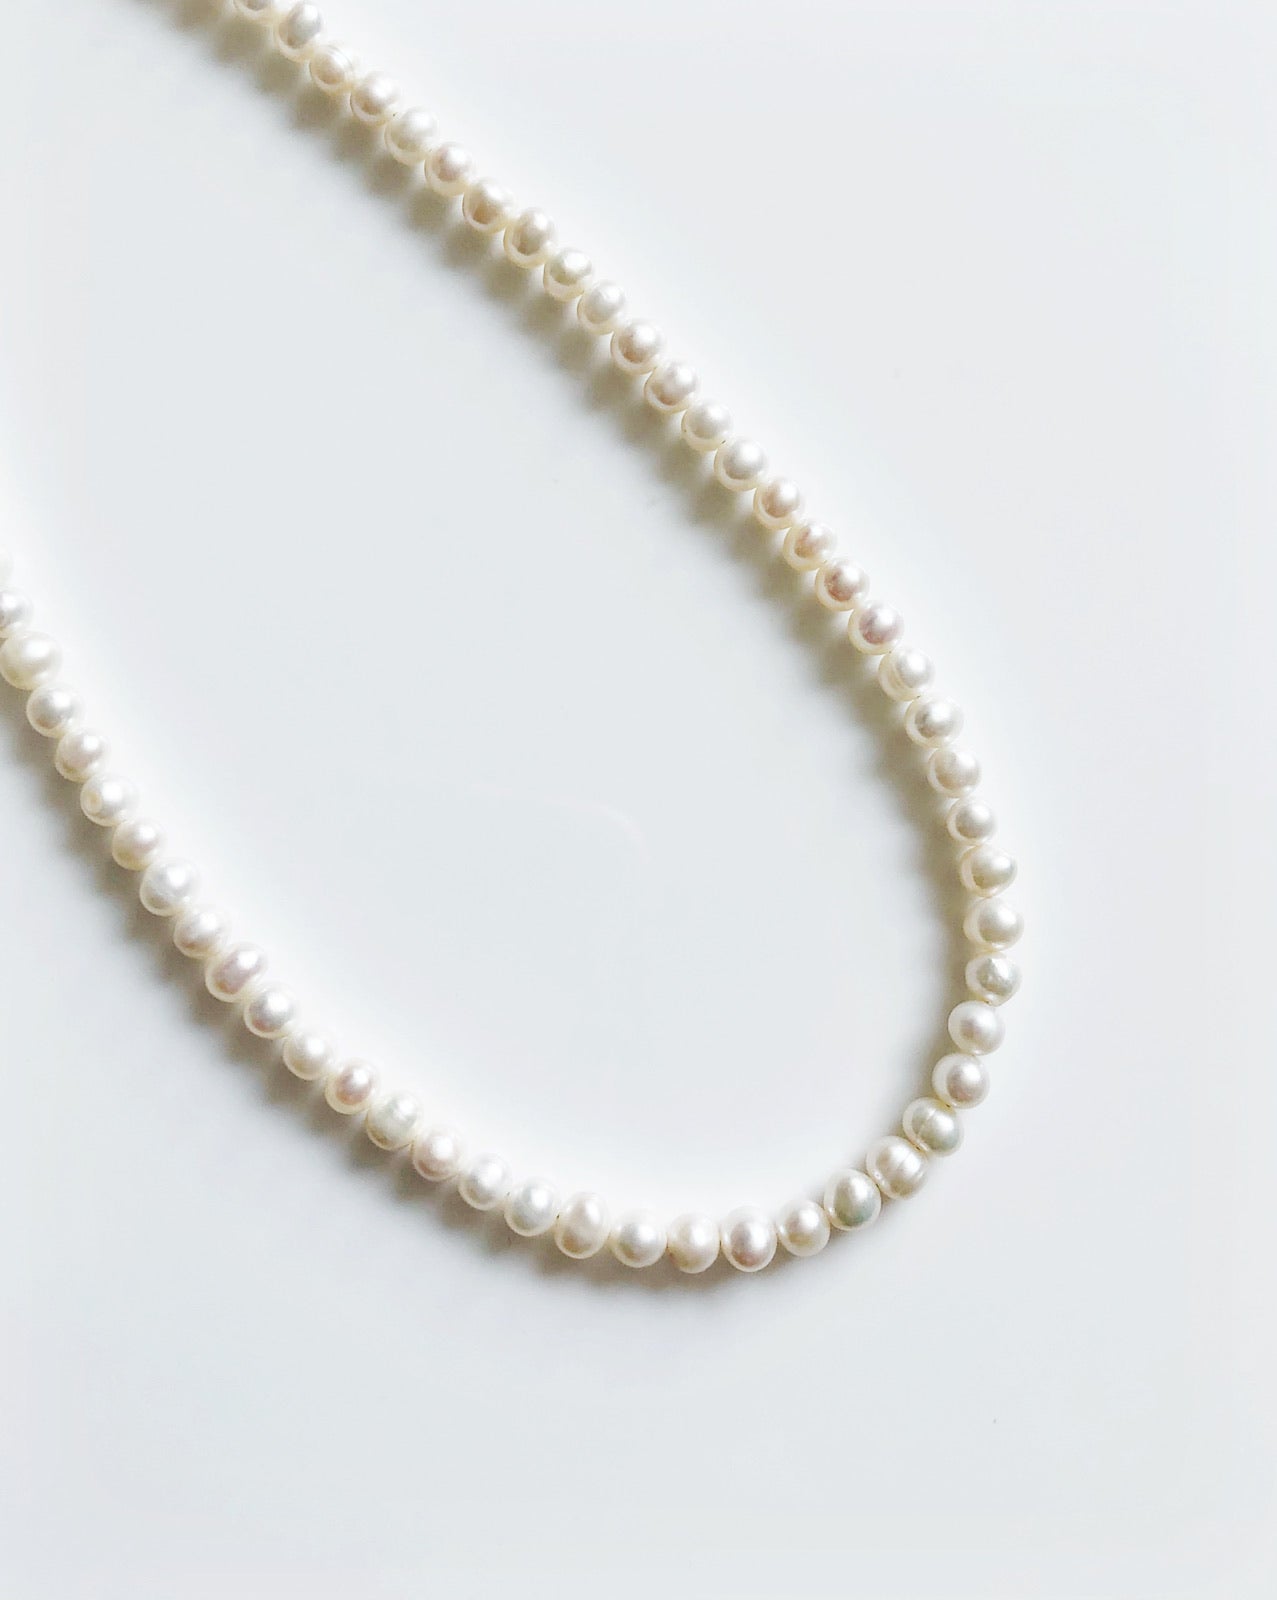 Family heirloom wedding freshwater pearl necklace